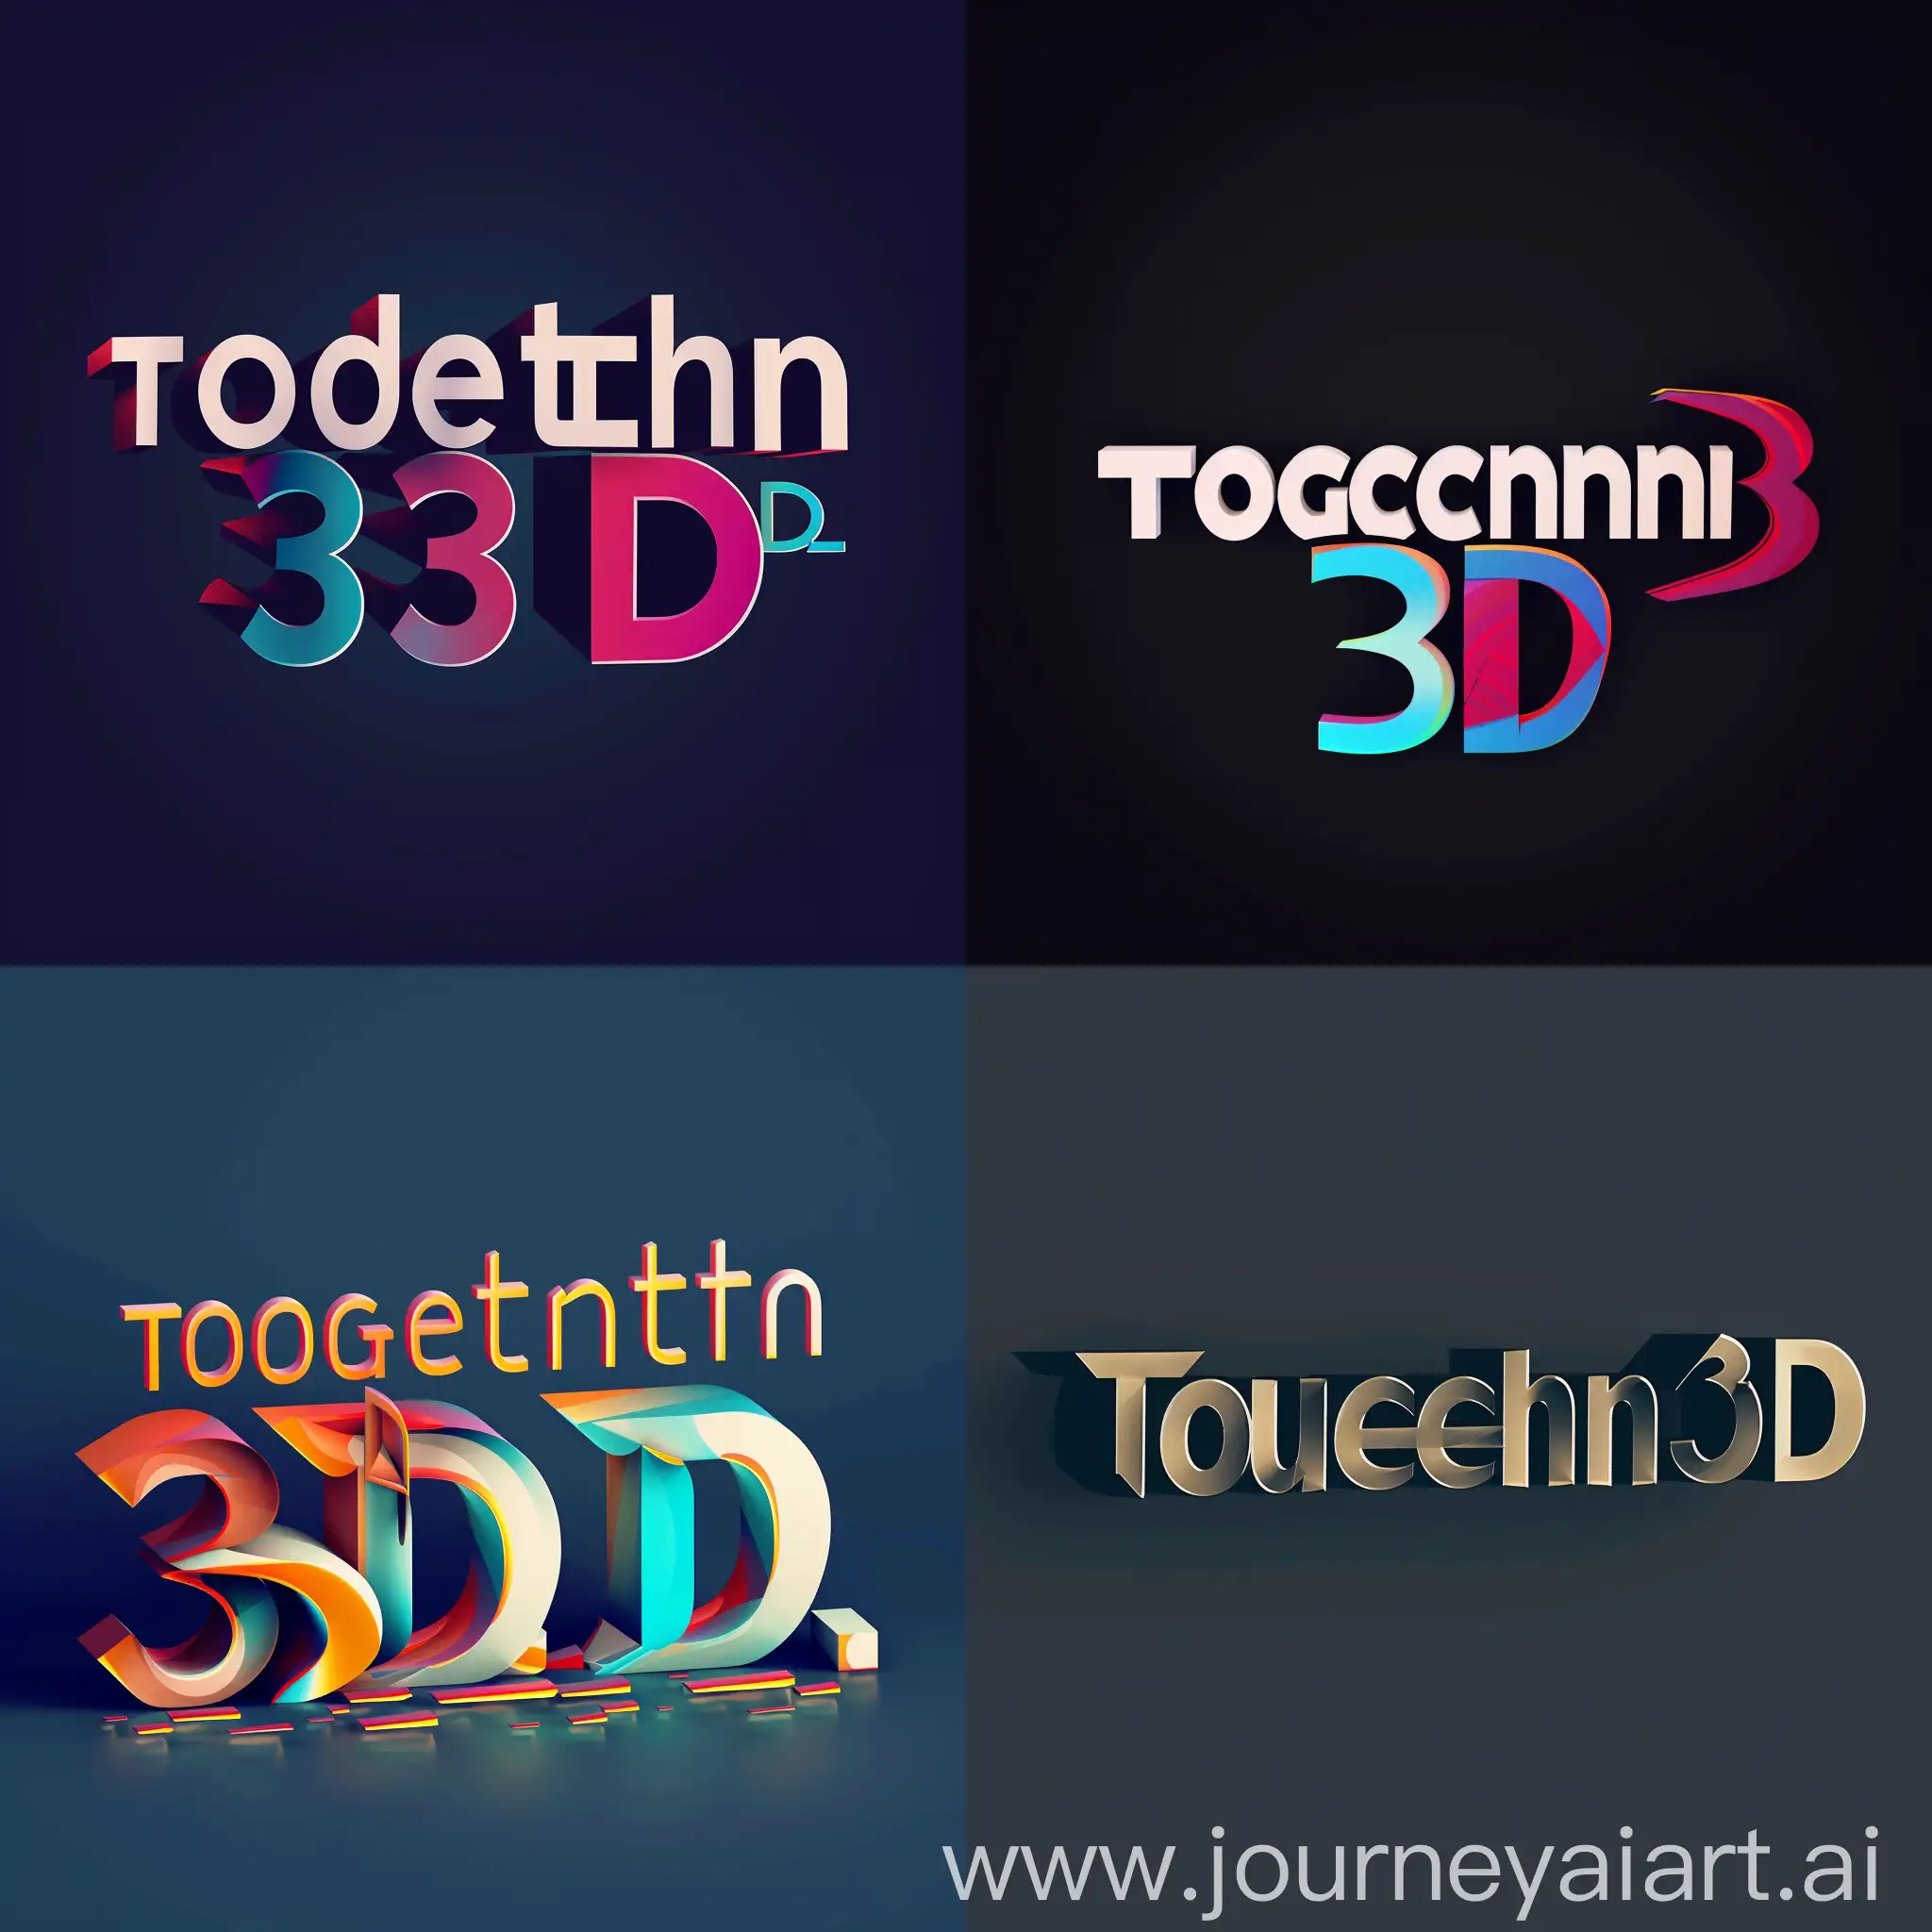 Create a logo for a 3D visualization studio with the text "Together3D". The concept should convey reliability, creativity, and trust